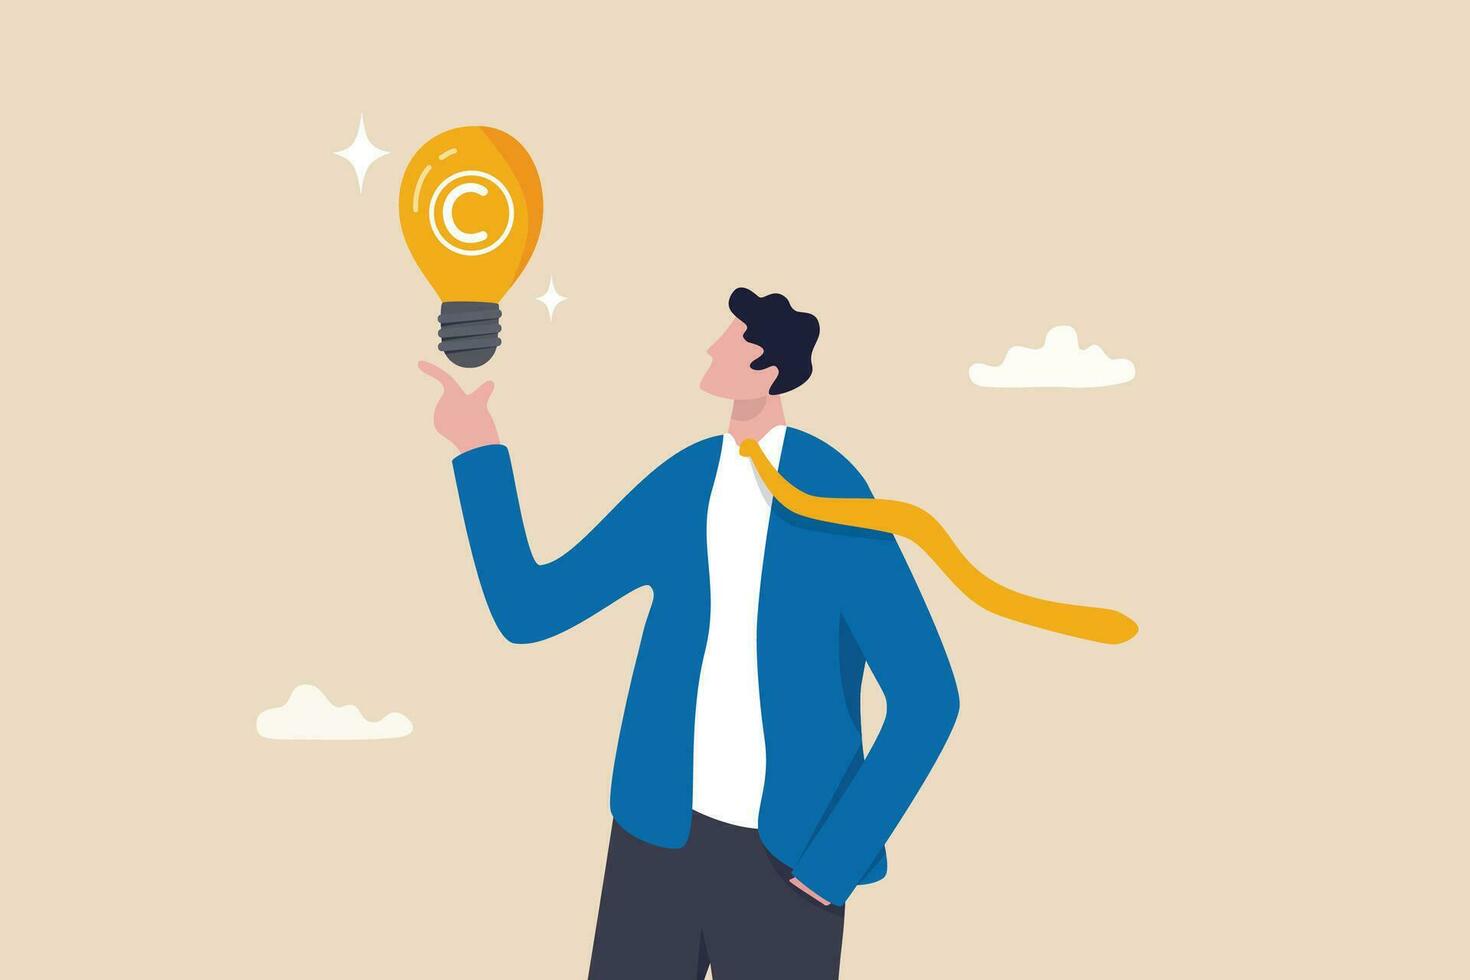 Copyright reserved, trademark intellectual property protection, original idea or innovation, legal or law protection registered concept, businessman holding light bulb idea with copyright symbol. vector